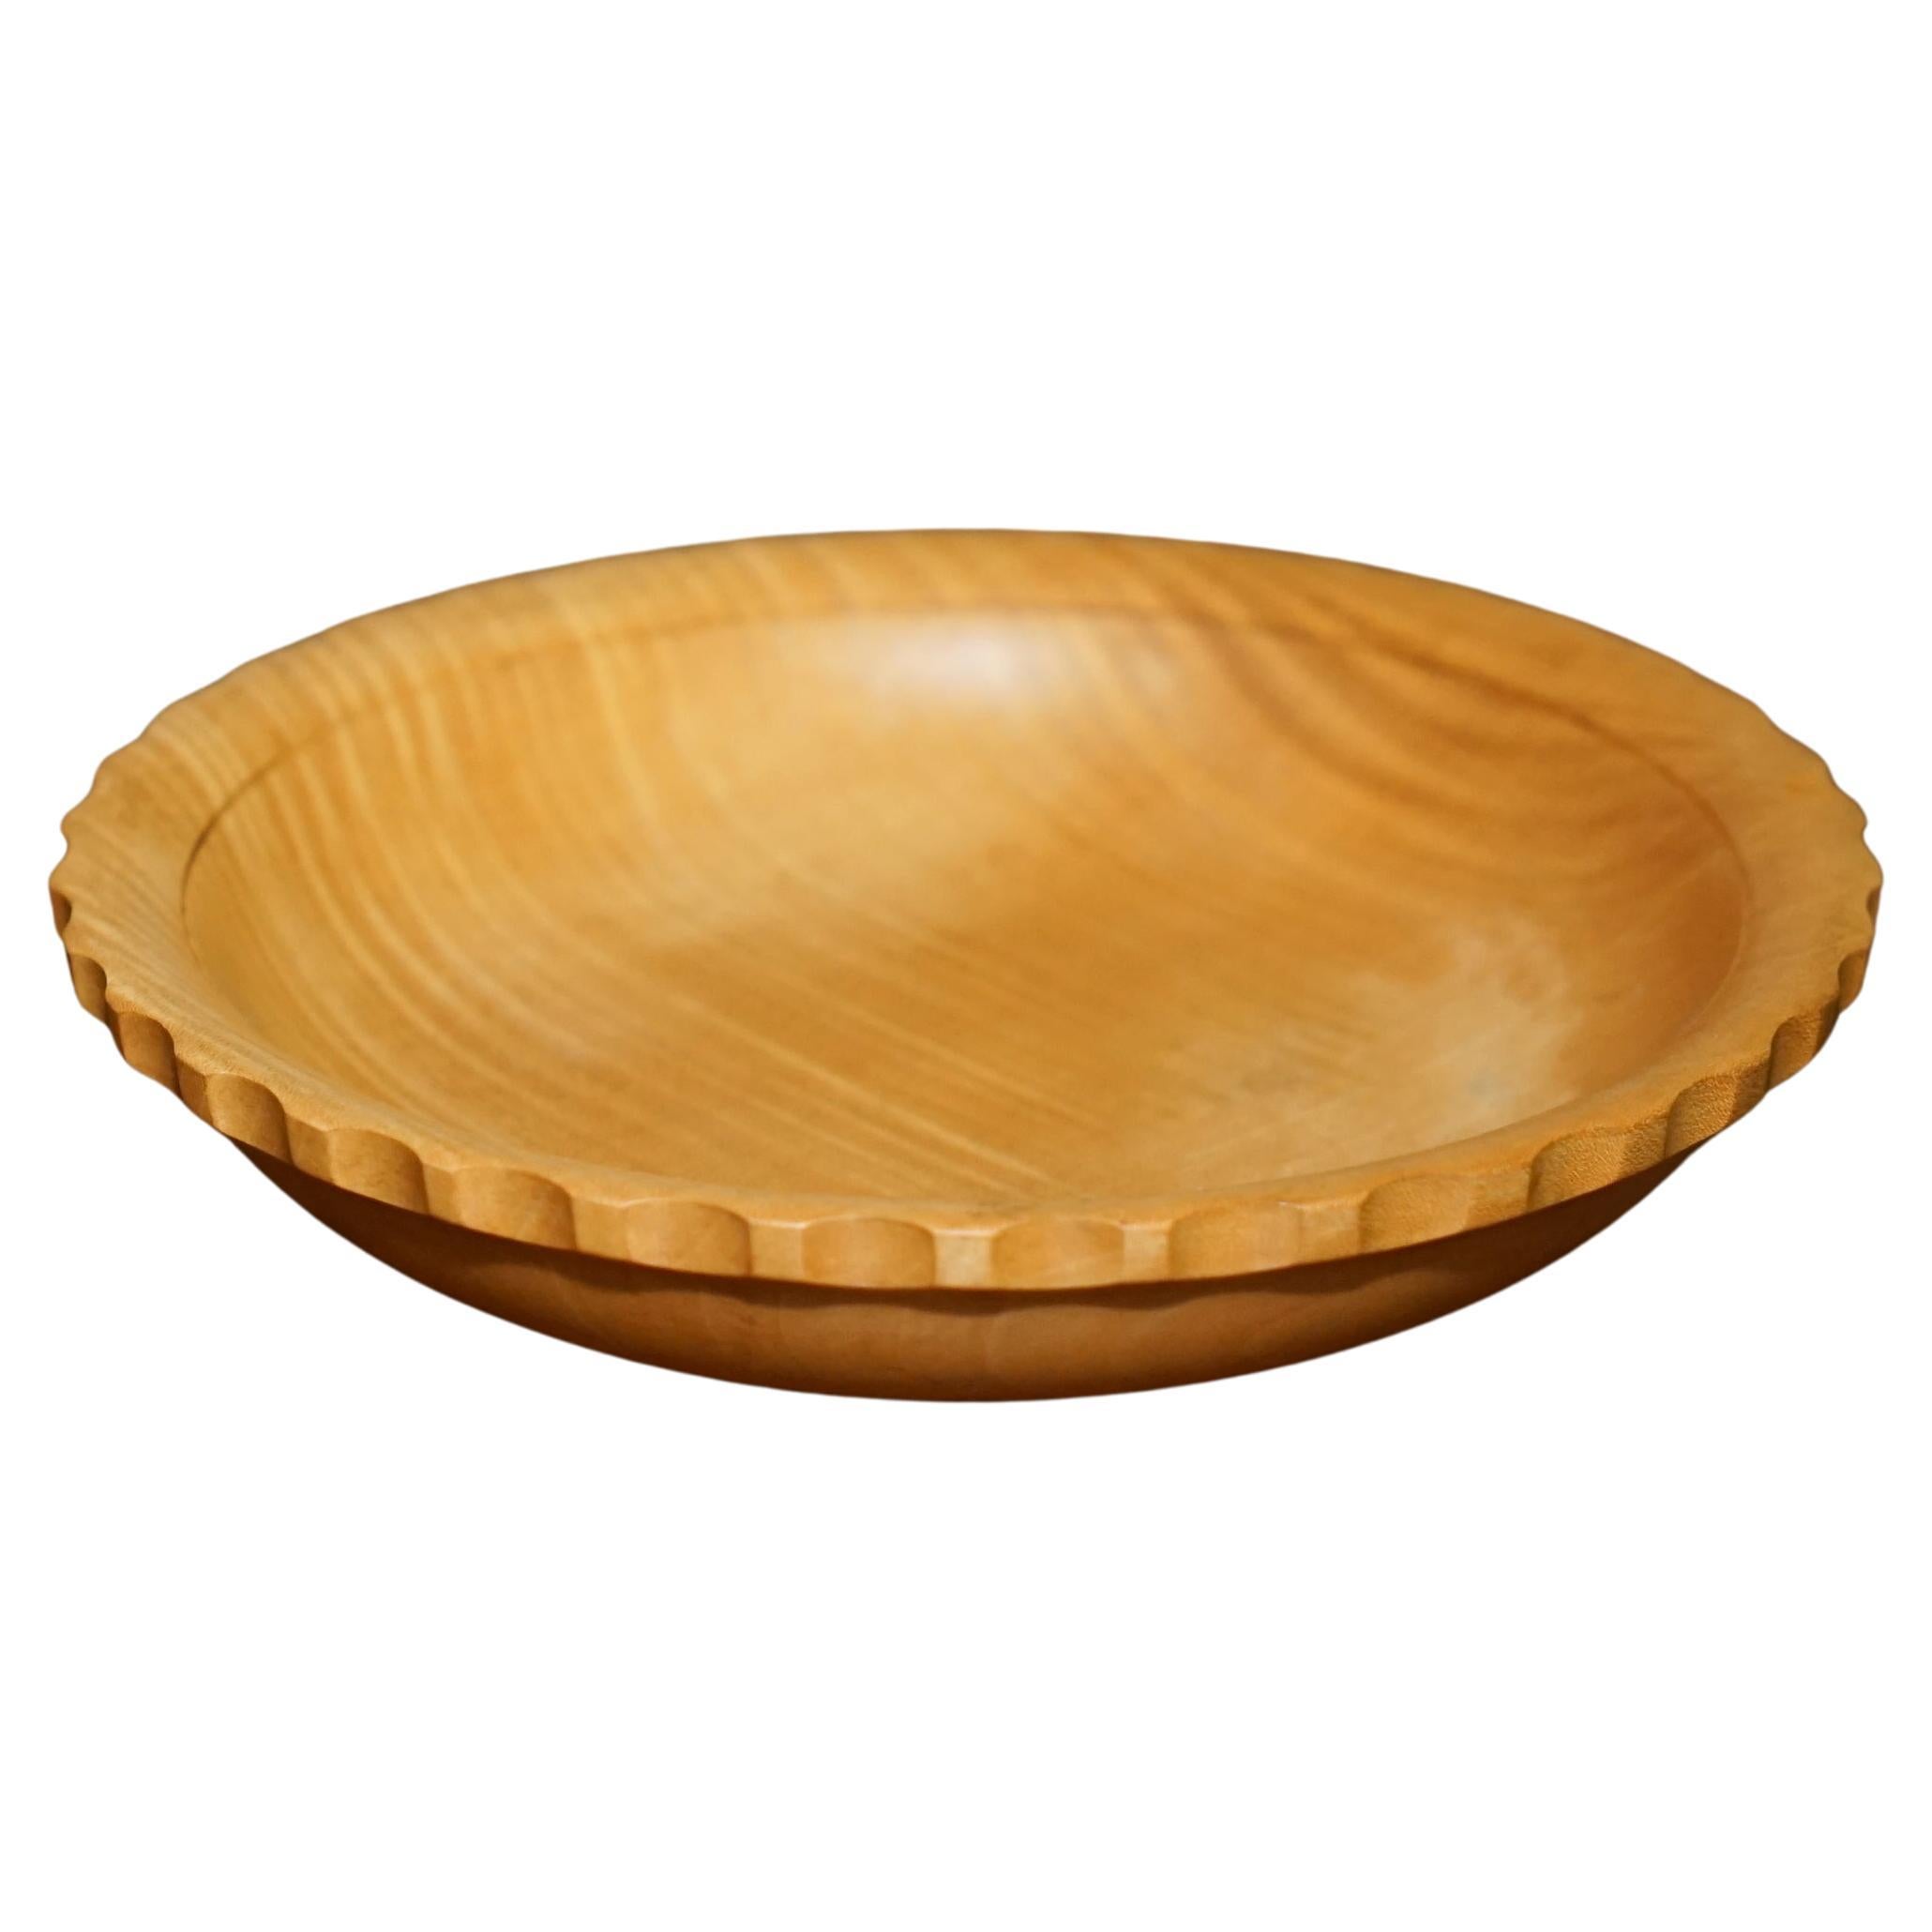 HAND MADE ViNTAGE RIPPLE SYCAMORE FRUIT BOWL SIGNED TO THE BASE BOB FRENCH For Sale